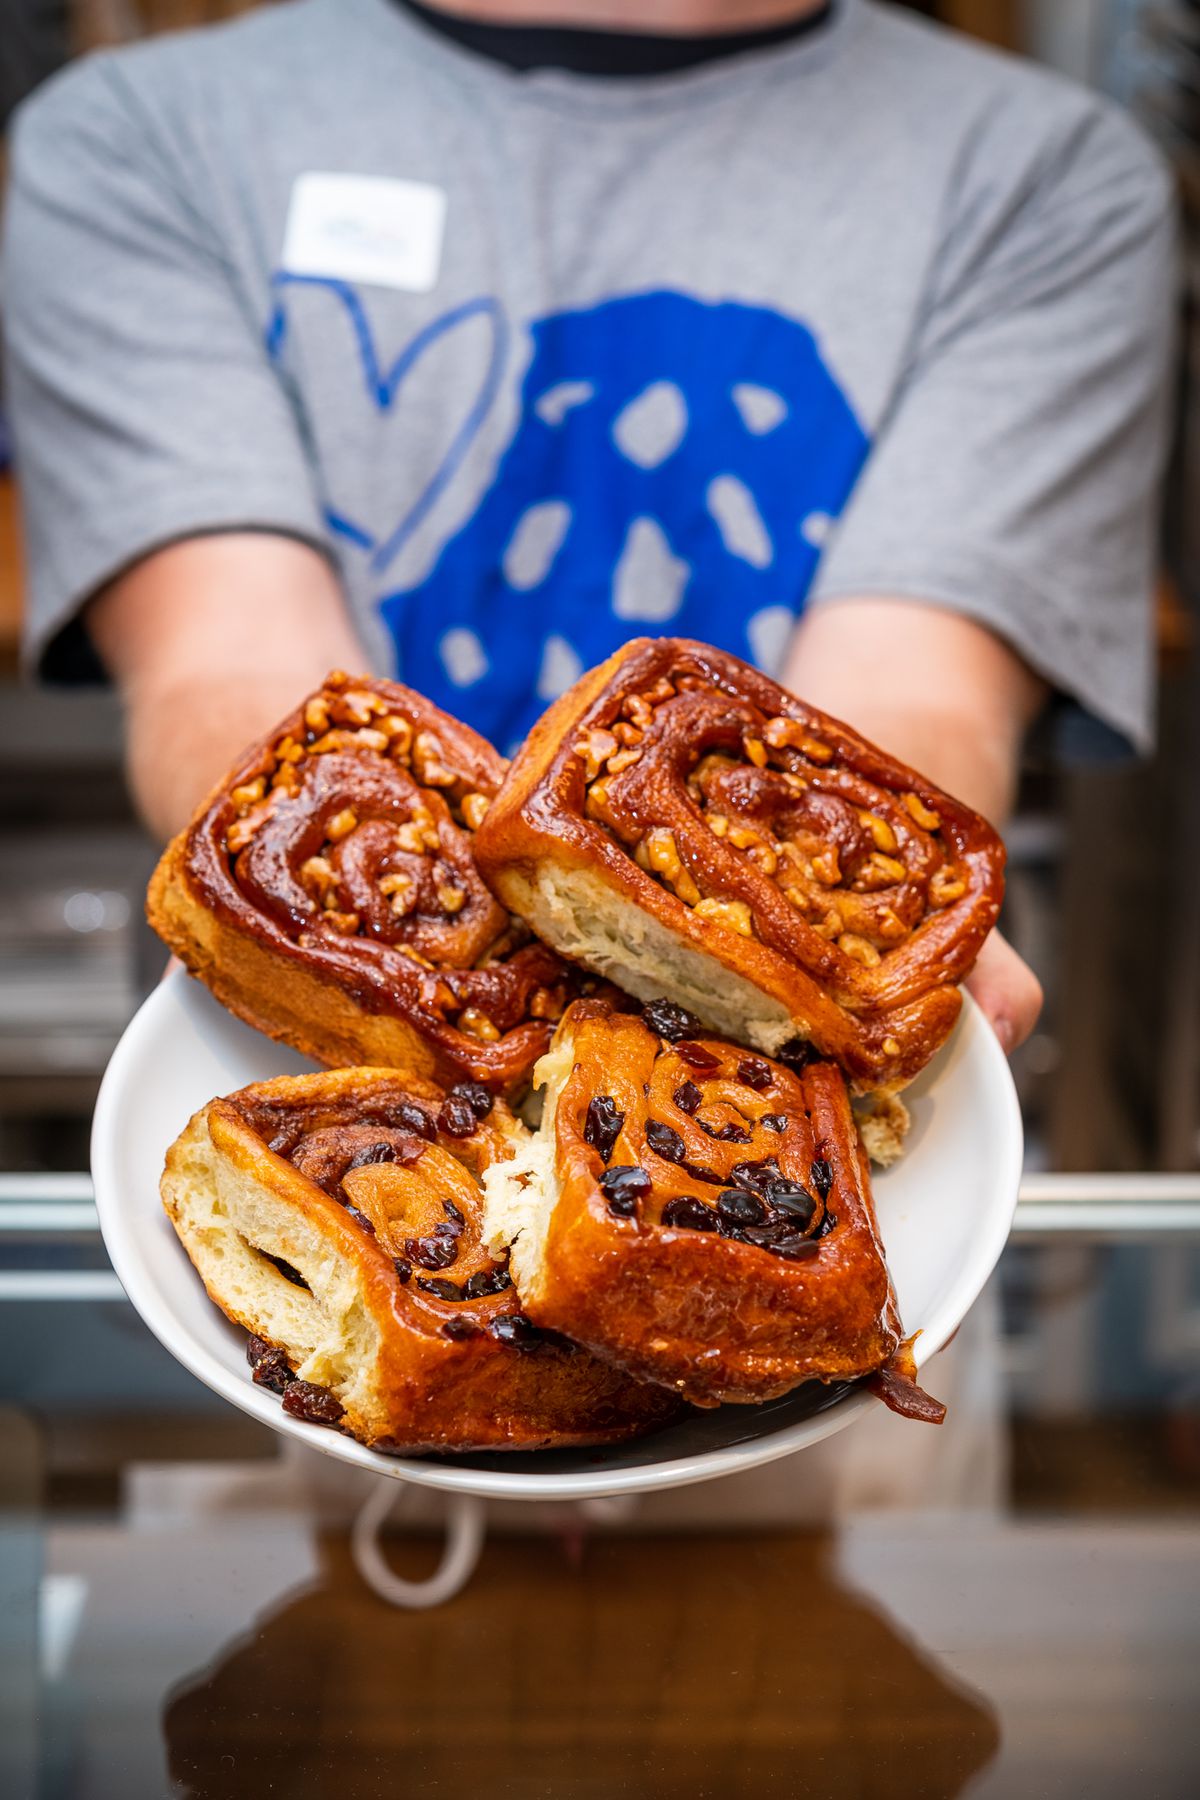 A staff member at Levain presents a plate filled with swirled raisin and walnut sticky buns.